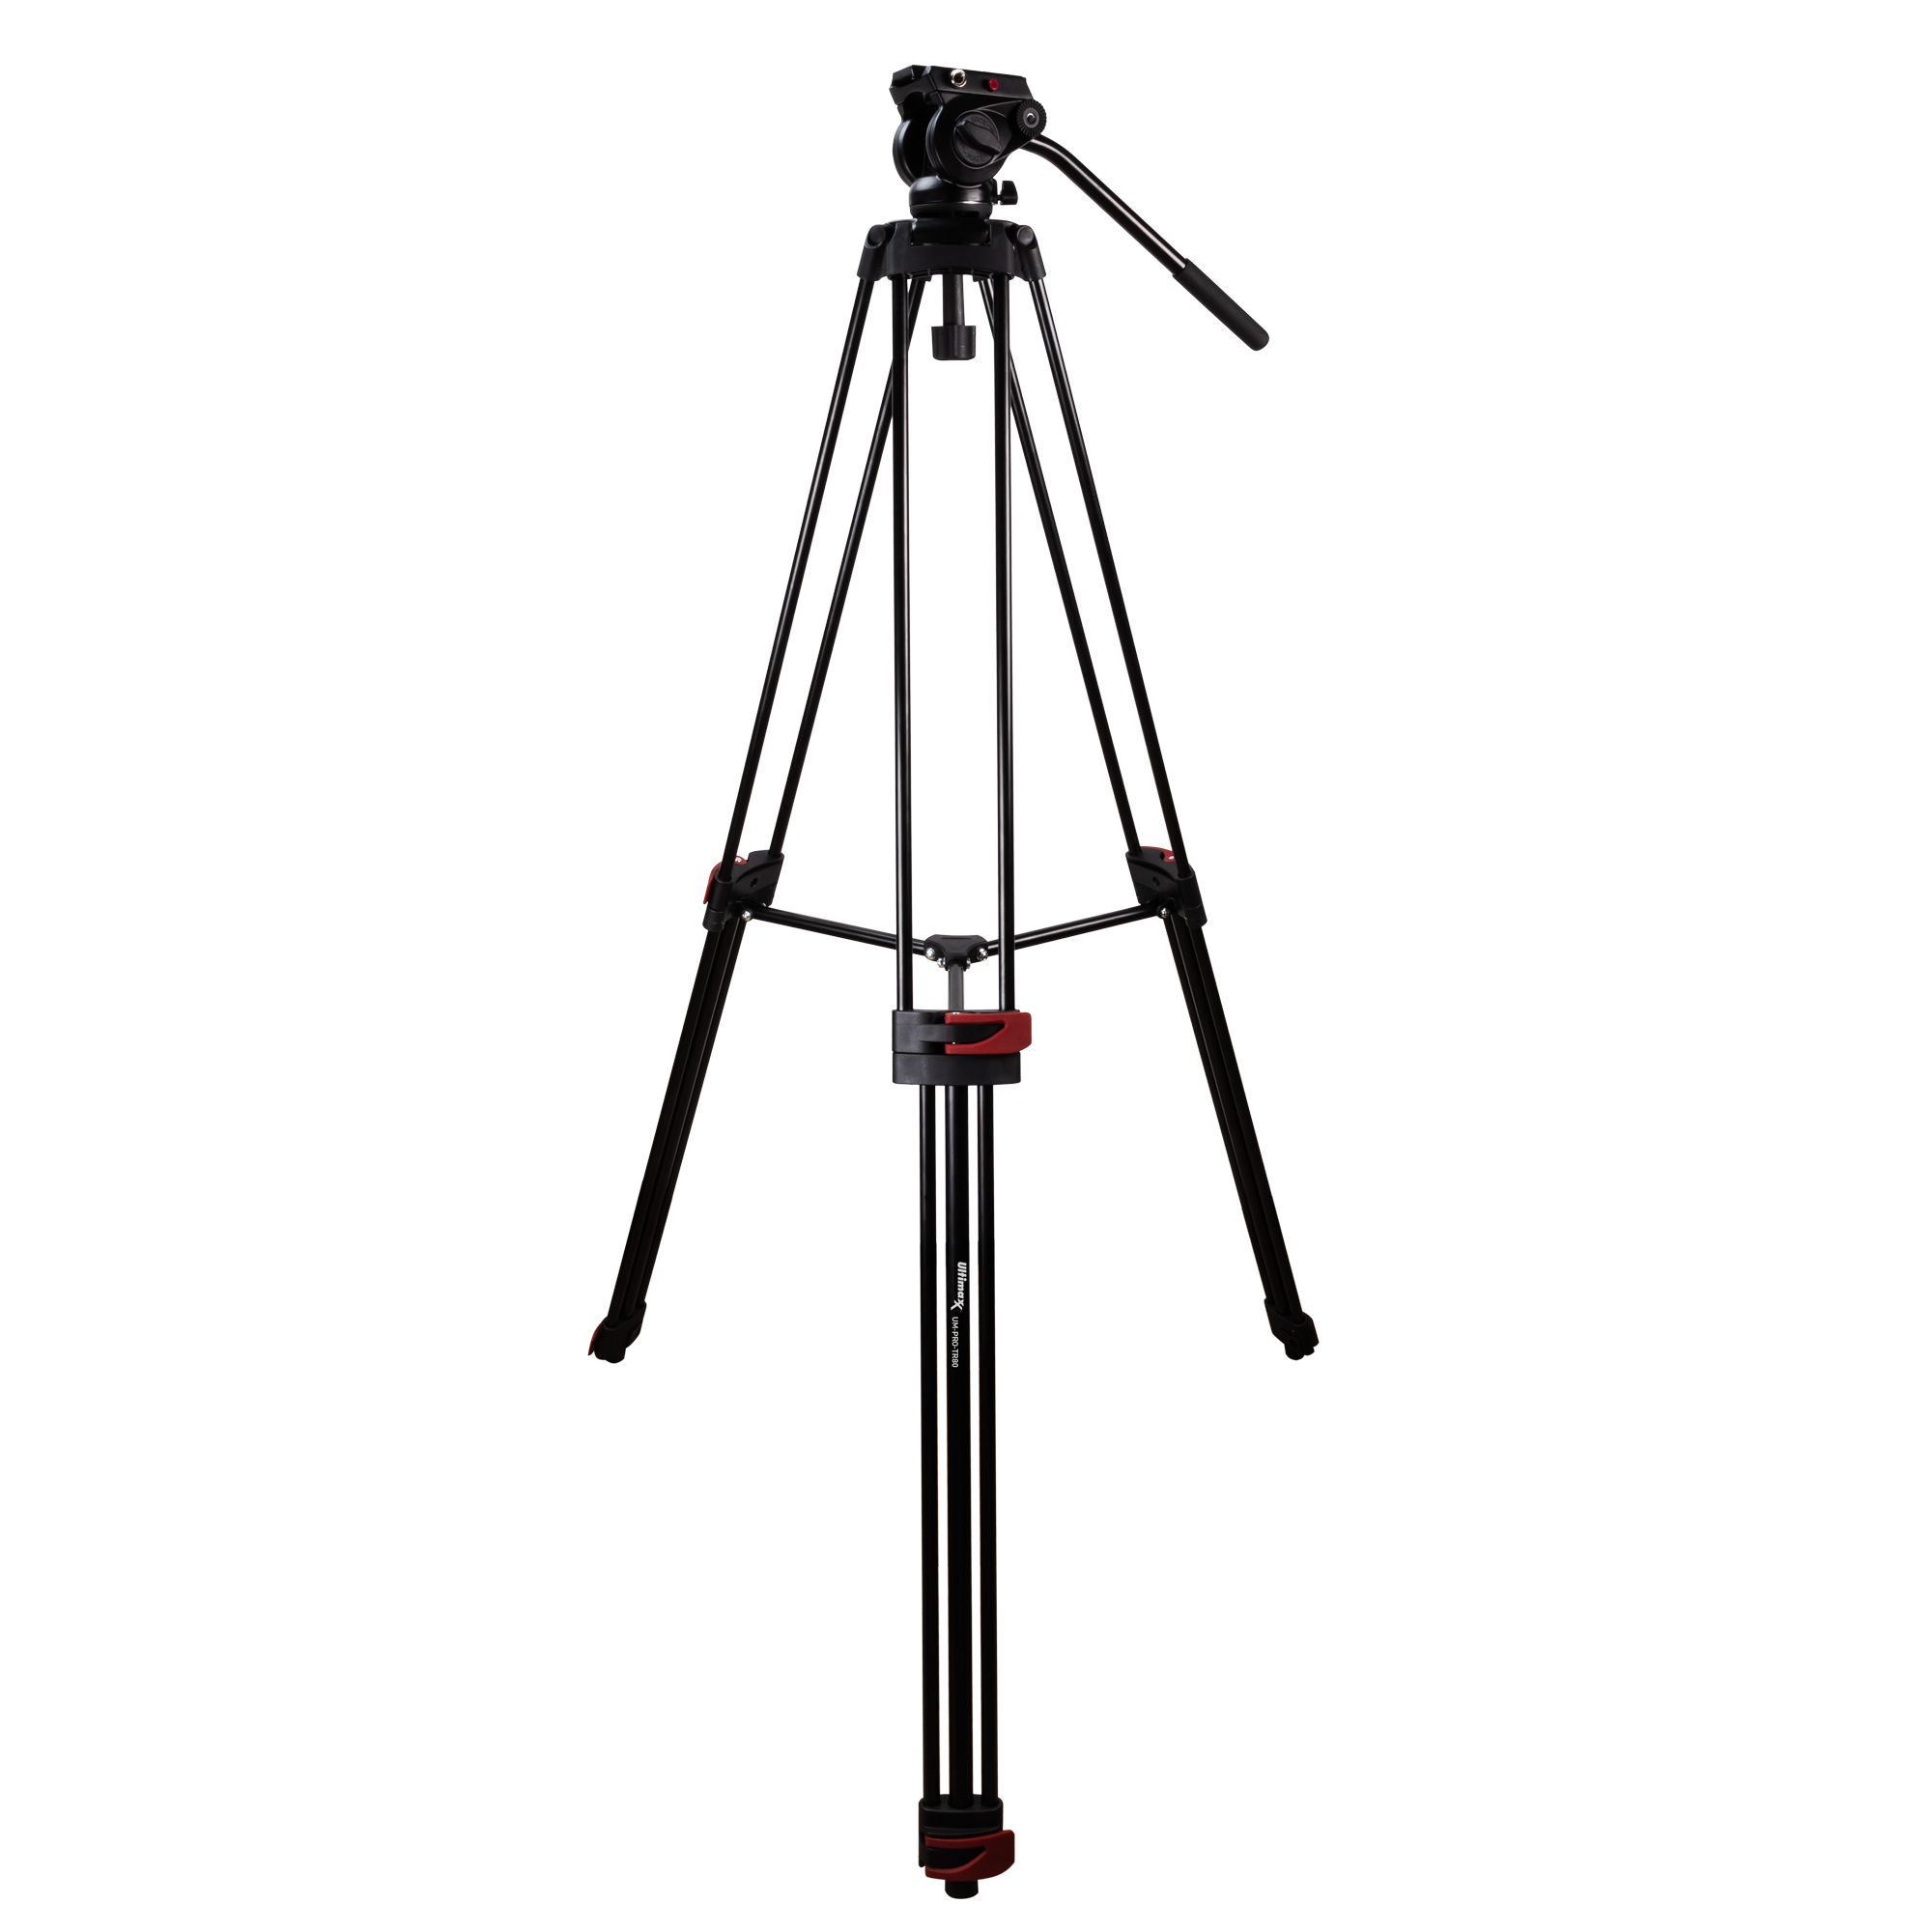 Image of Ultimaxx 80" Professional Deluxe Video Tripod